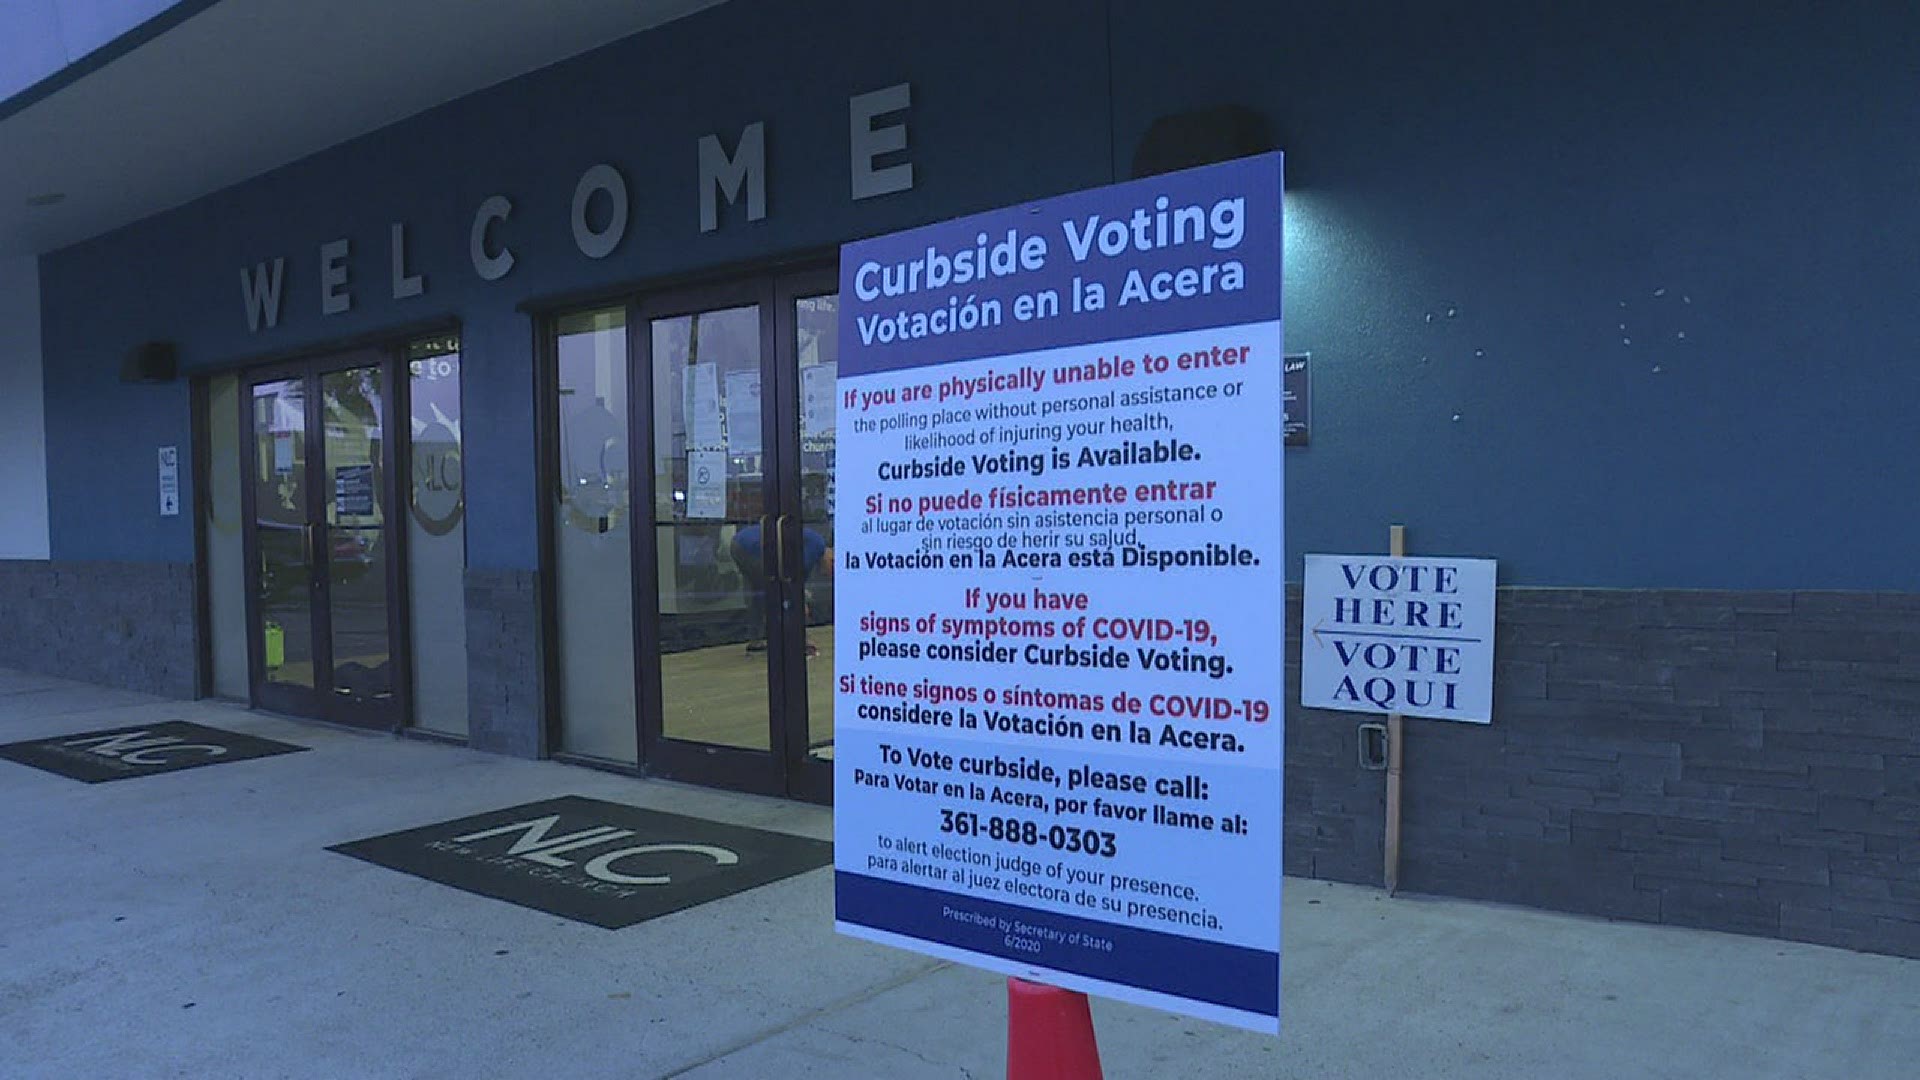 "It is very clear in the law of who is eligible to vote curbside"